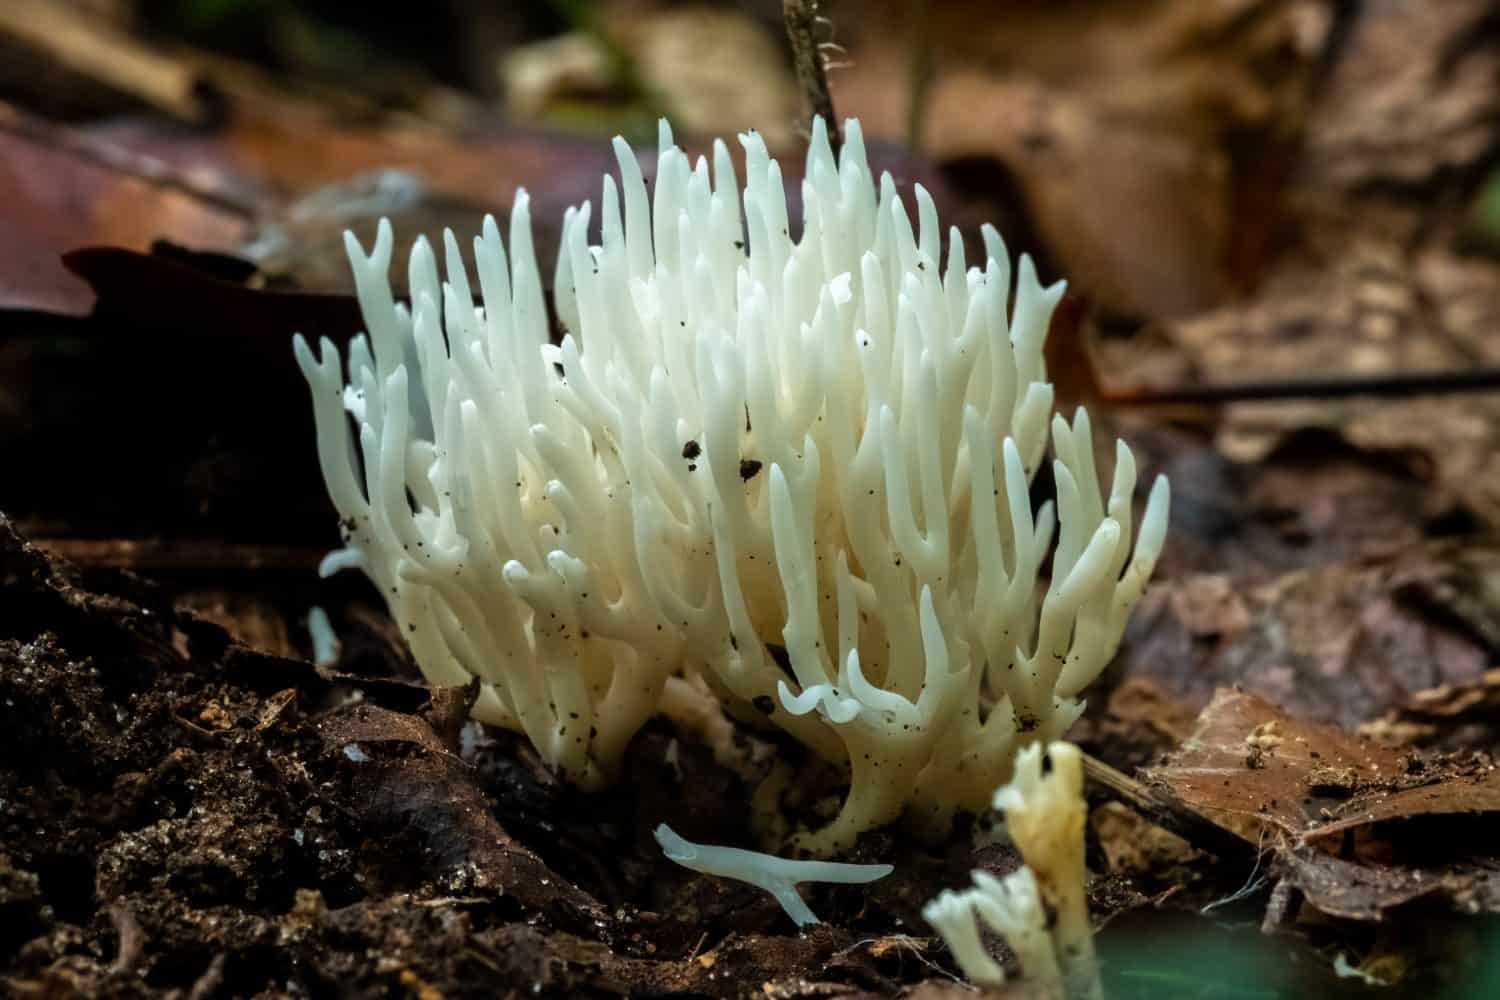 White Coral Fungus (Ramariopsis kunzei) grows in the forest during fall. Raleigh, North Carolina.